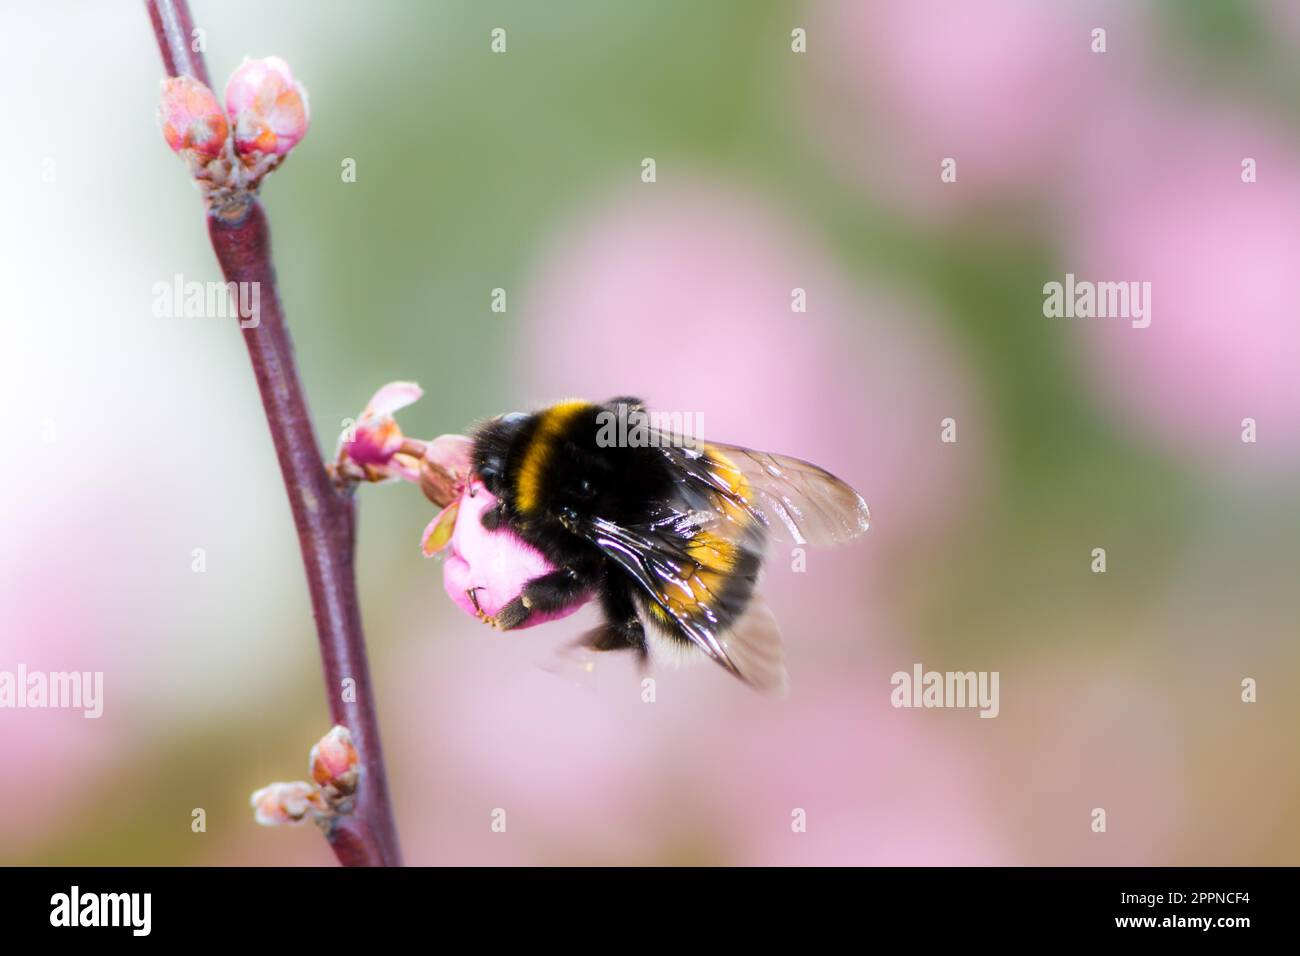 Bumbleee collecting pollen and nectar at pink cherry blossom Stock Photo